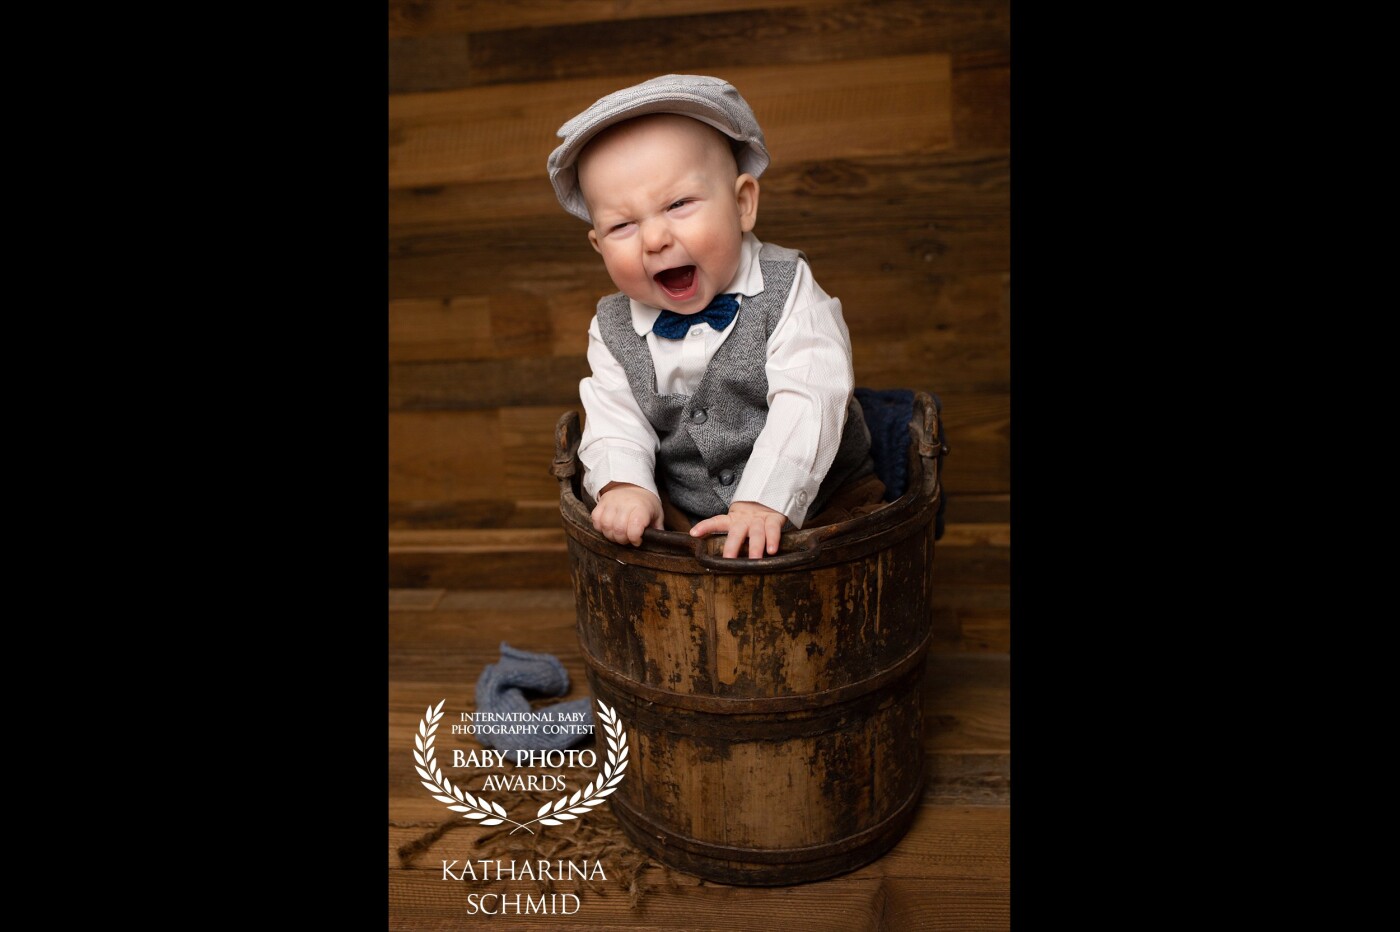 This cute little guy, 7 months old, really enjoyed his first photo shooting. I’m so happy that I could capture this special moment when he had to laugh very deeply and heartily although it was very hard for me as he made me laugh with his funny grimaces too.